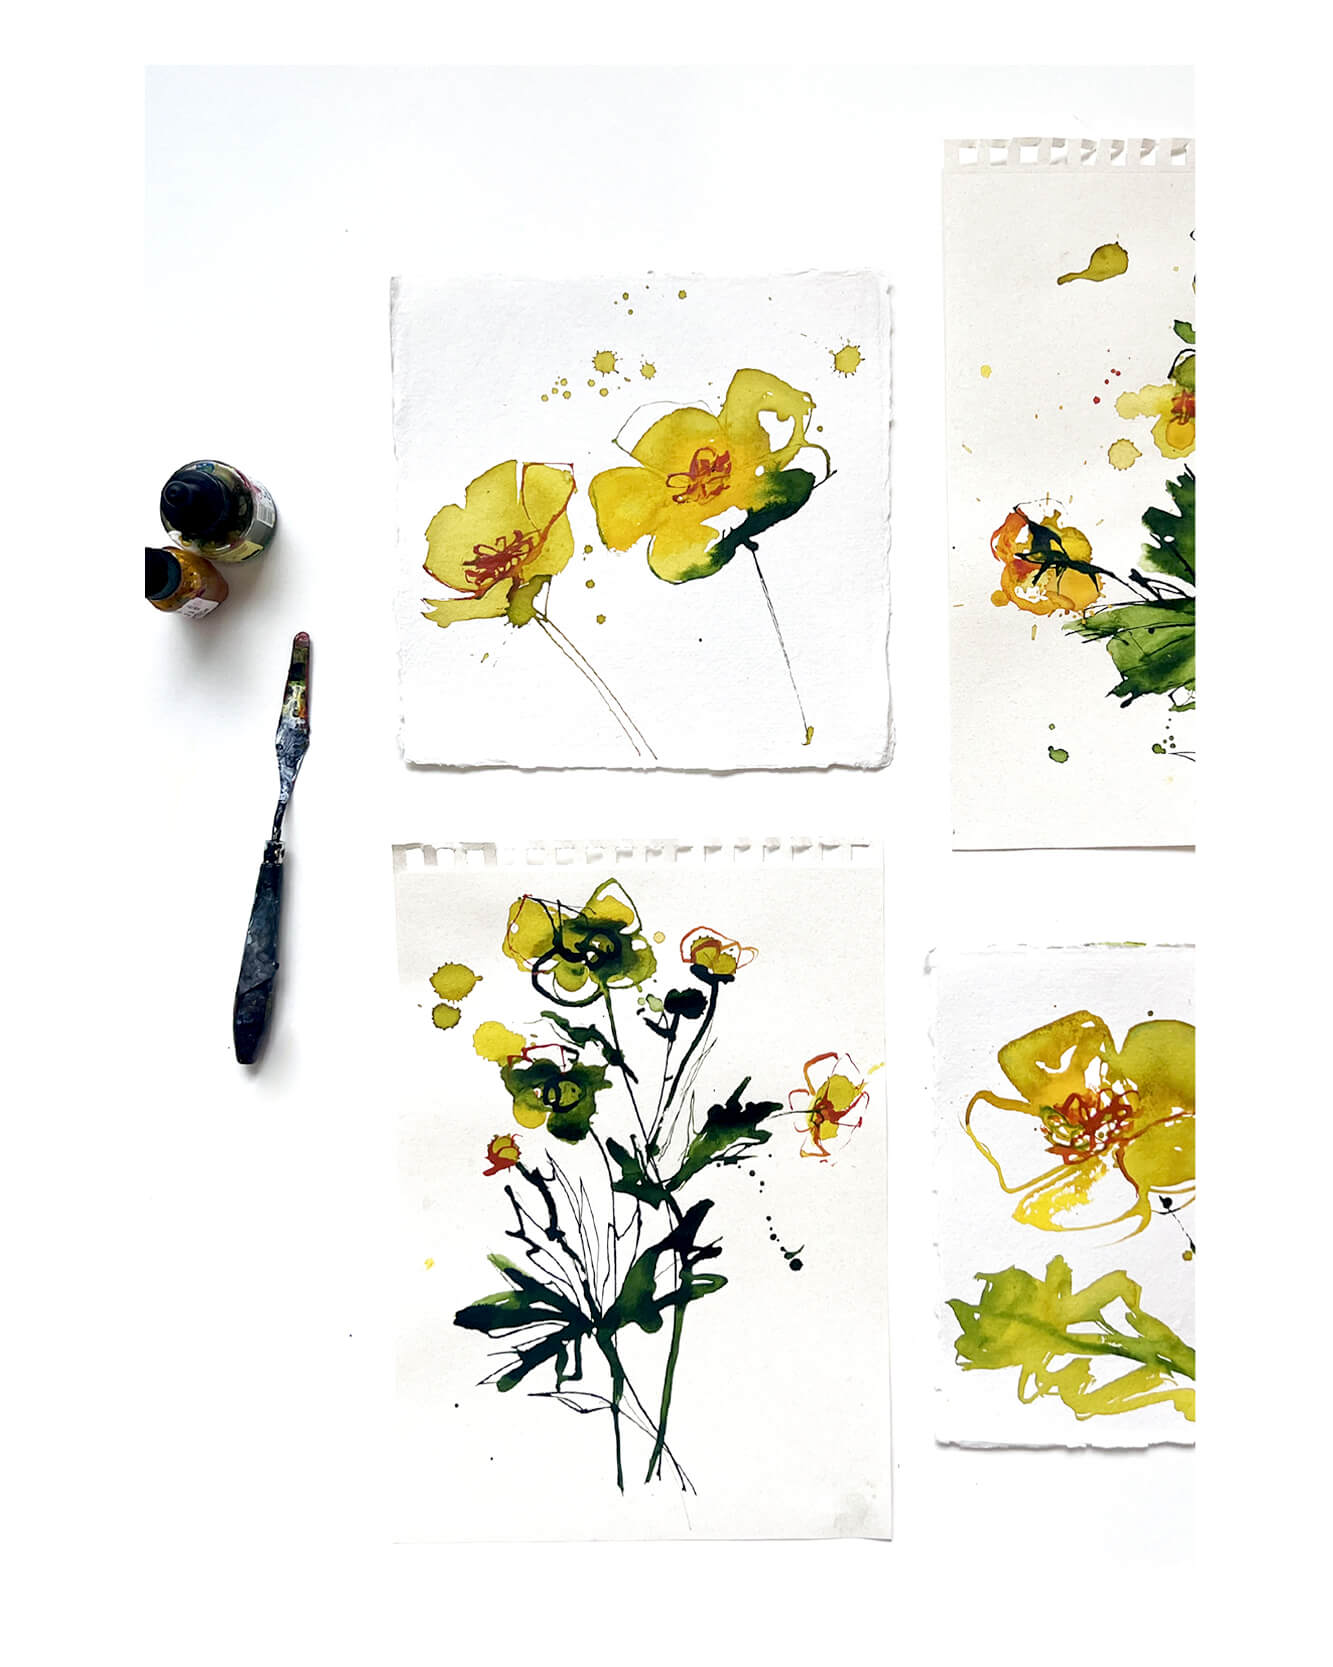 Buttercups filling a field, little specks of yellow - little drops of sunshine to mark the beginning of Summertime. Sketches taken from my Summer sketchbook.